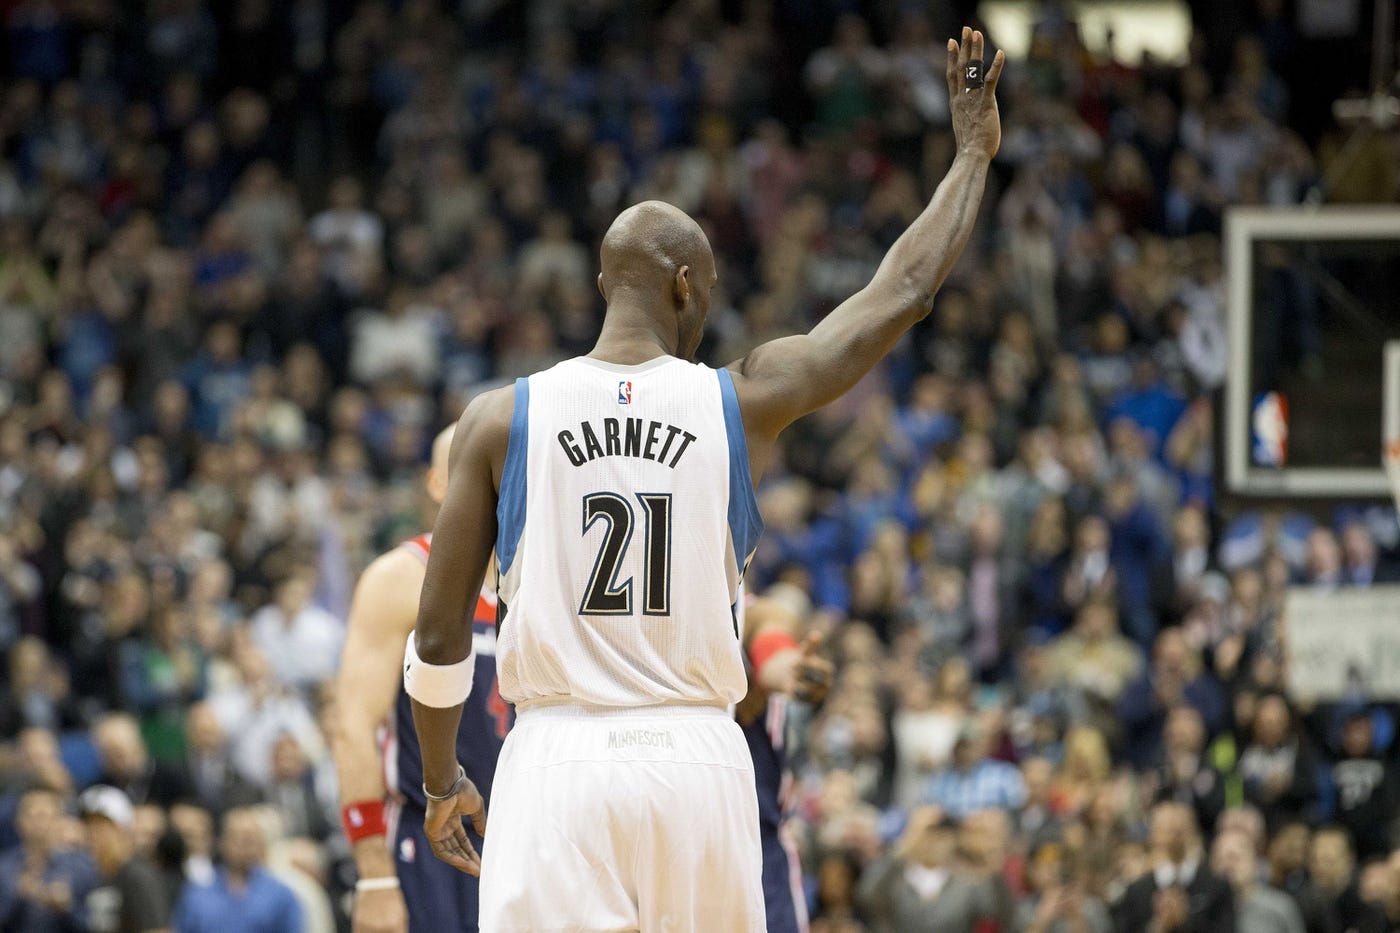 Feb 25, 2015; Minneapolis, MN, USA; Minnesota Timberwolves forward Kevin Garnett (21) waves to fans during a game against the Washington Wizards at Target Center.